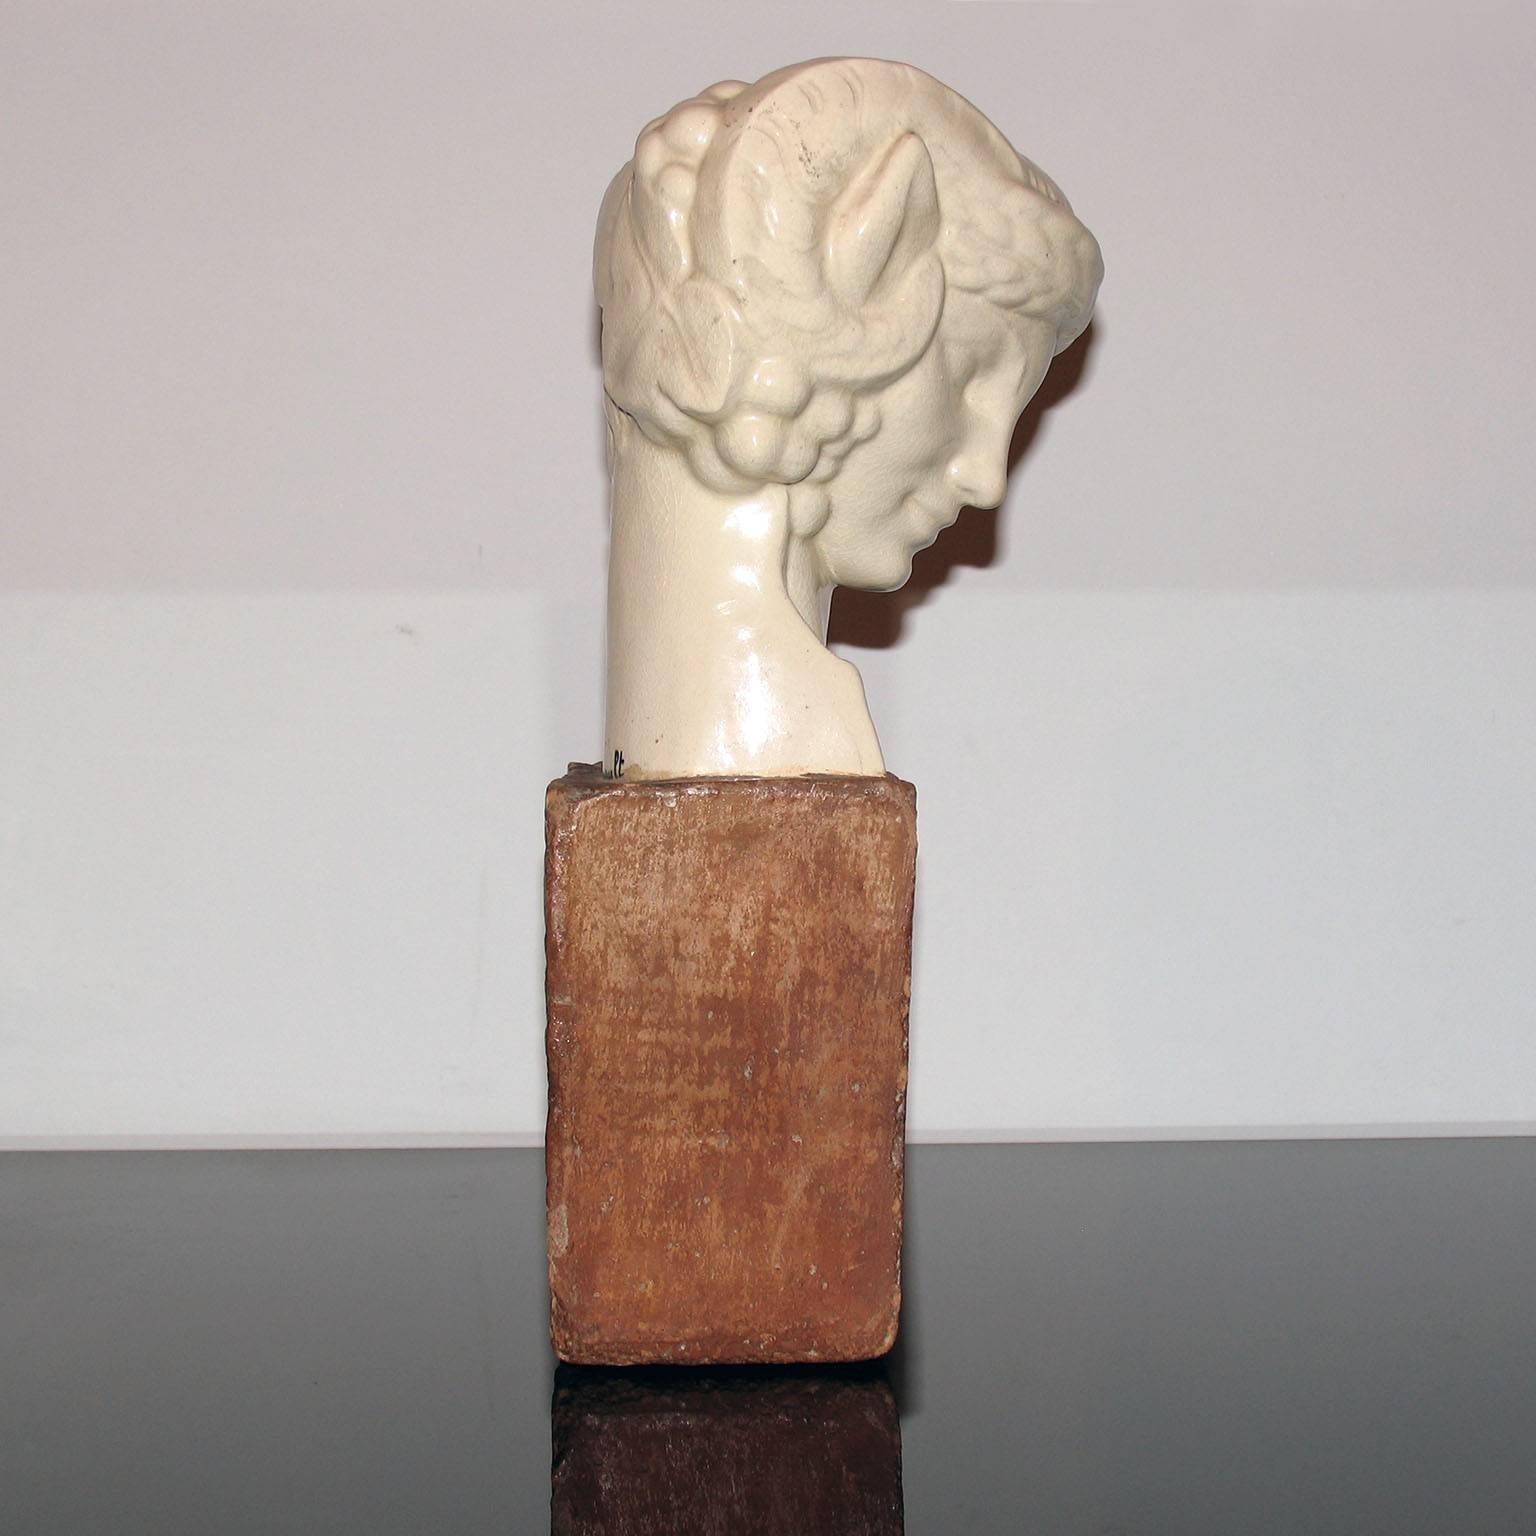 French Faun Head Ceramic Sculpture by Foucault